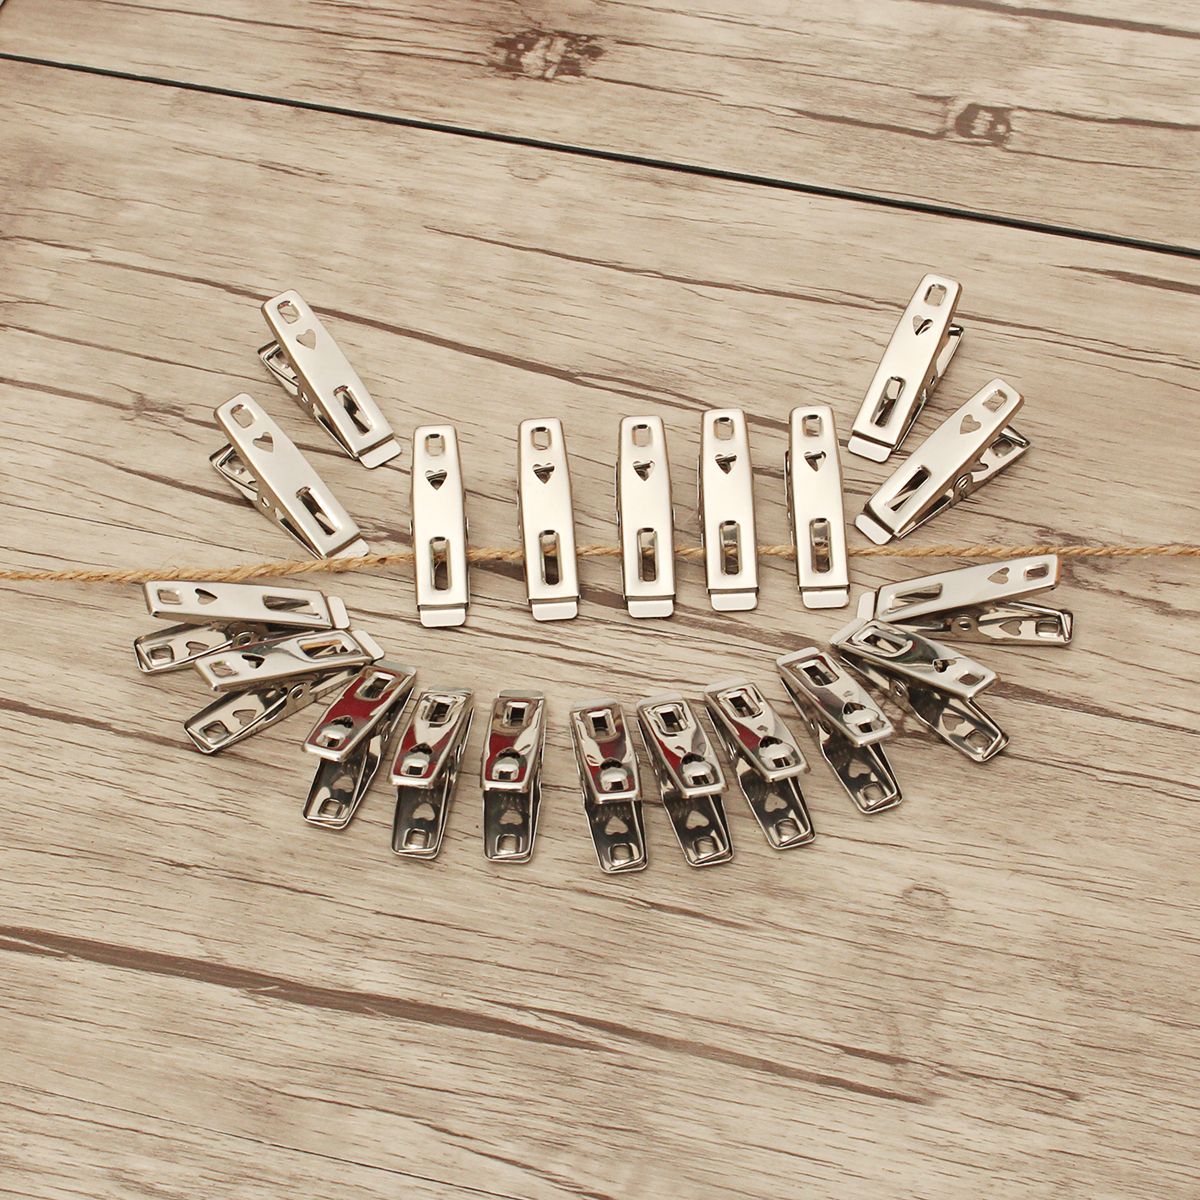 20Pcs-Stainless-Steel-Clothes-Pegs-Hanging-Pins-Laundry-Household-Clamps-Clamping-Tools-1274726